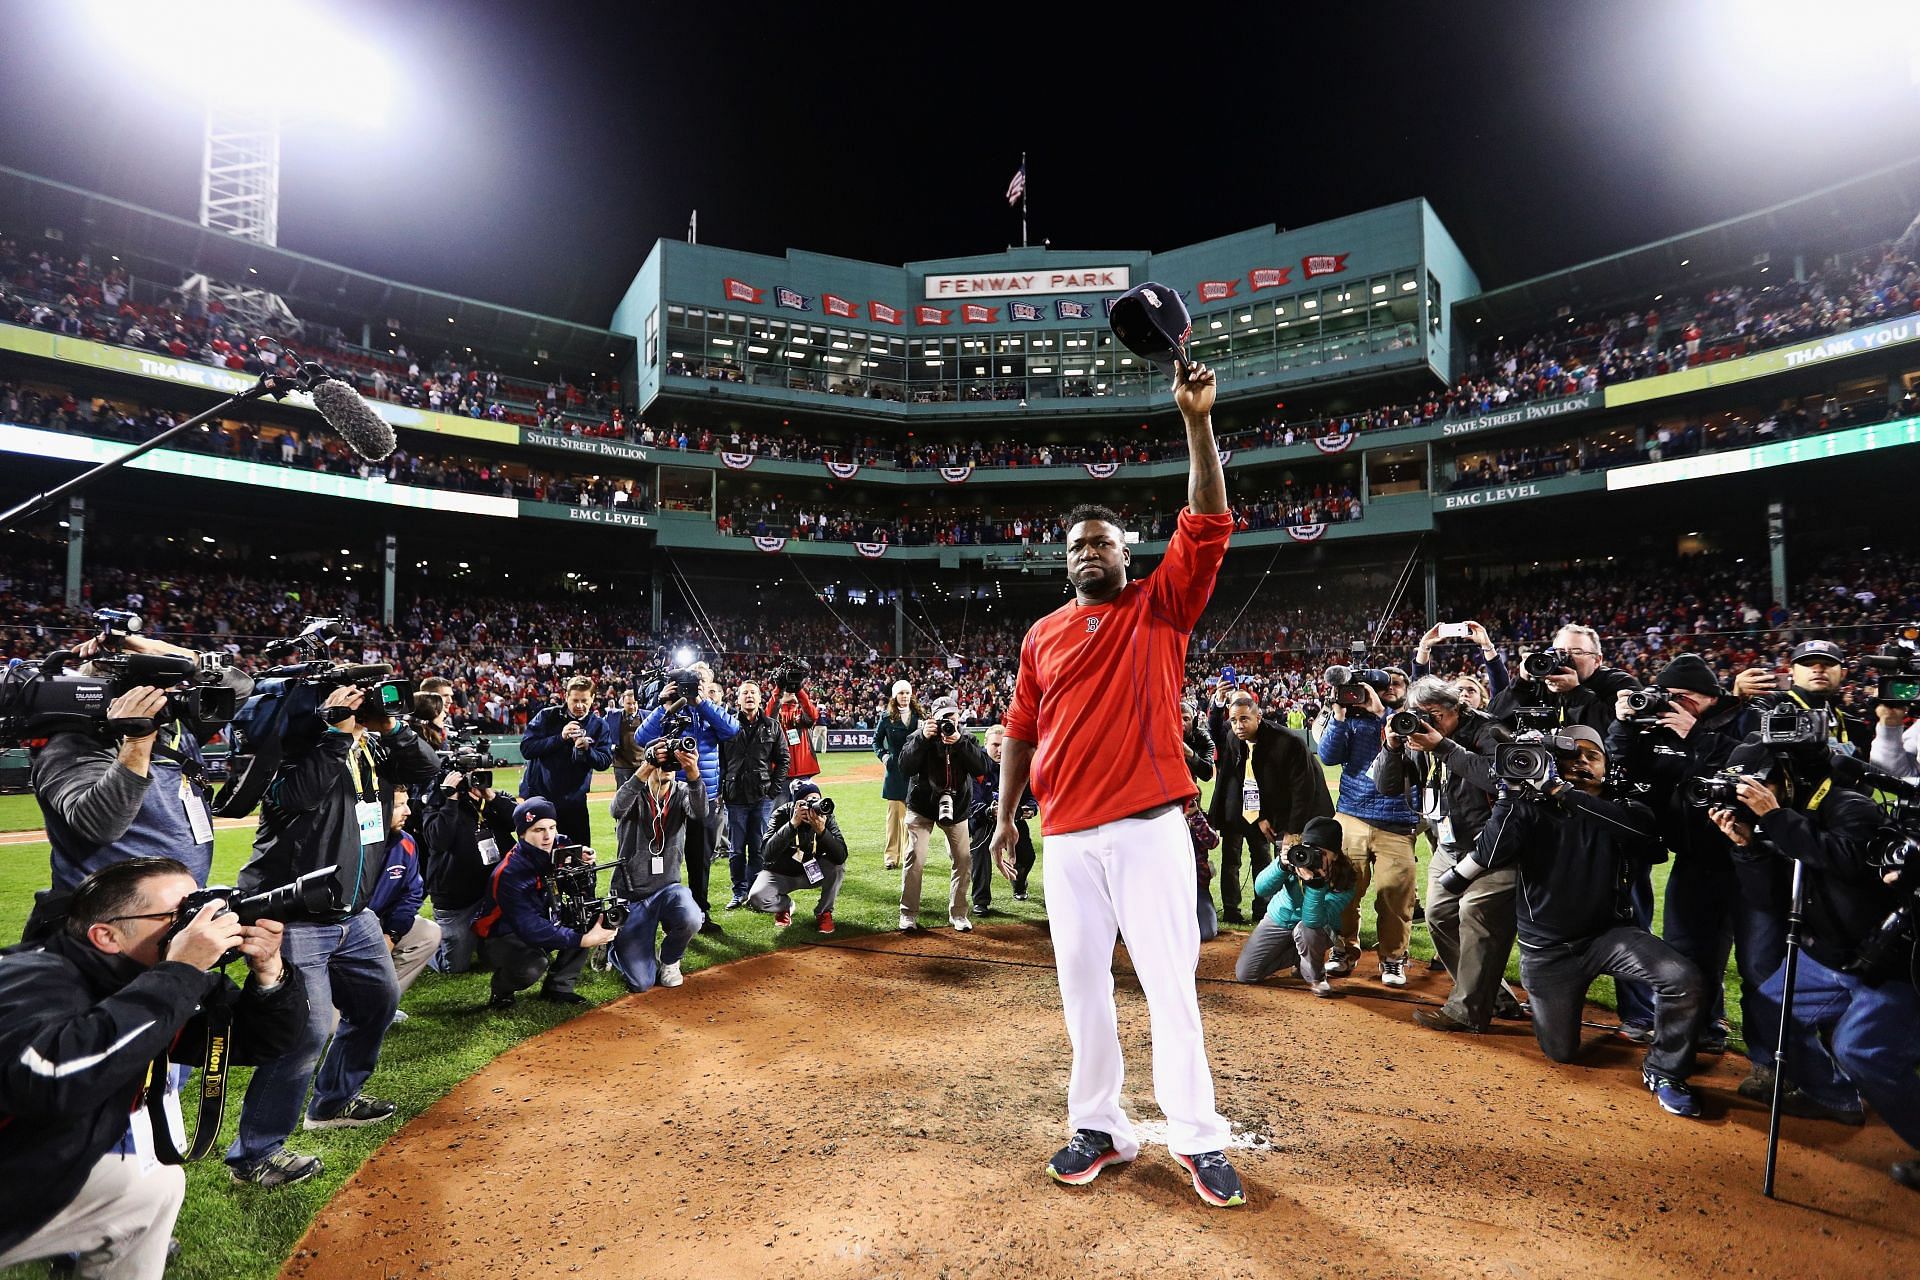 David Ortiz after his final game with the Boston Red Sox